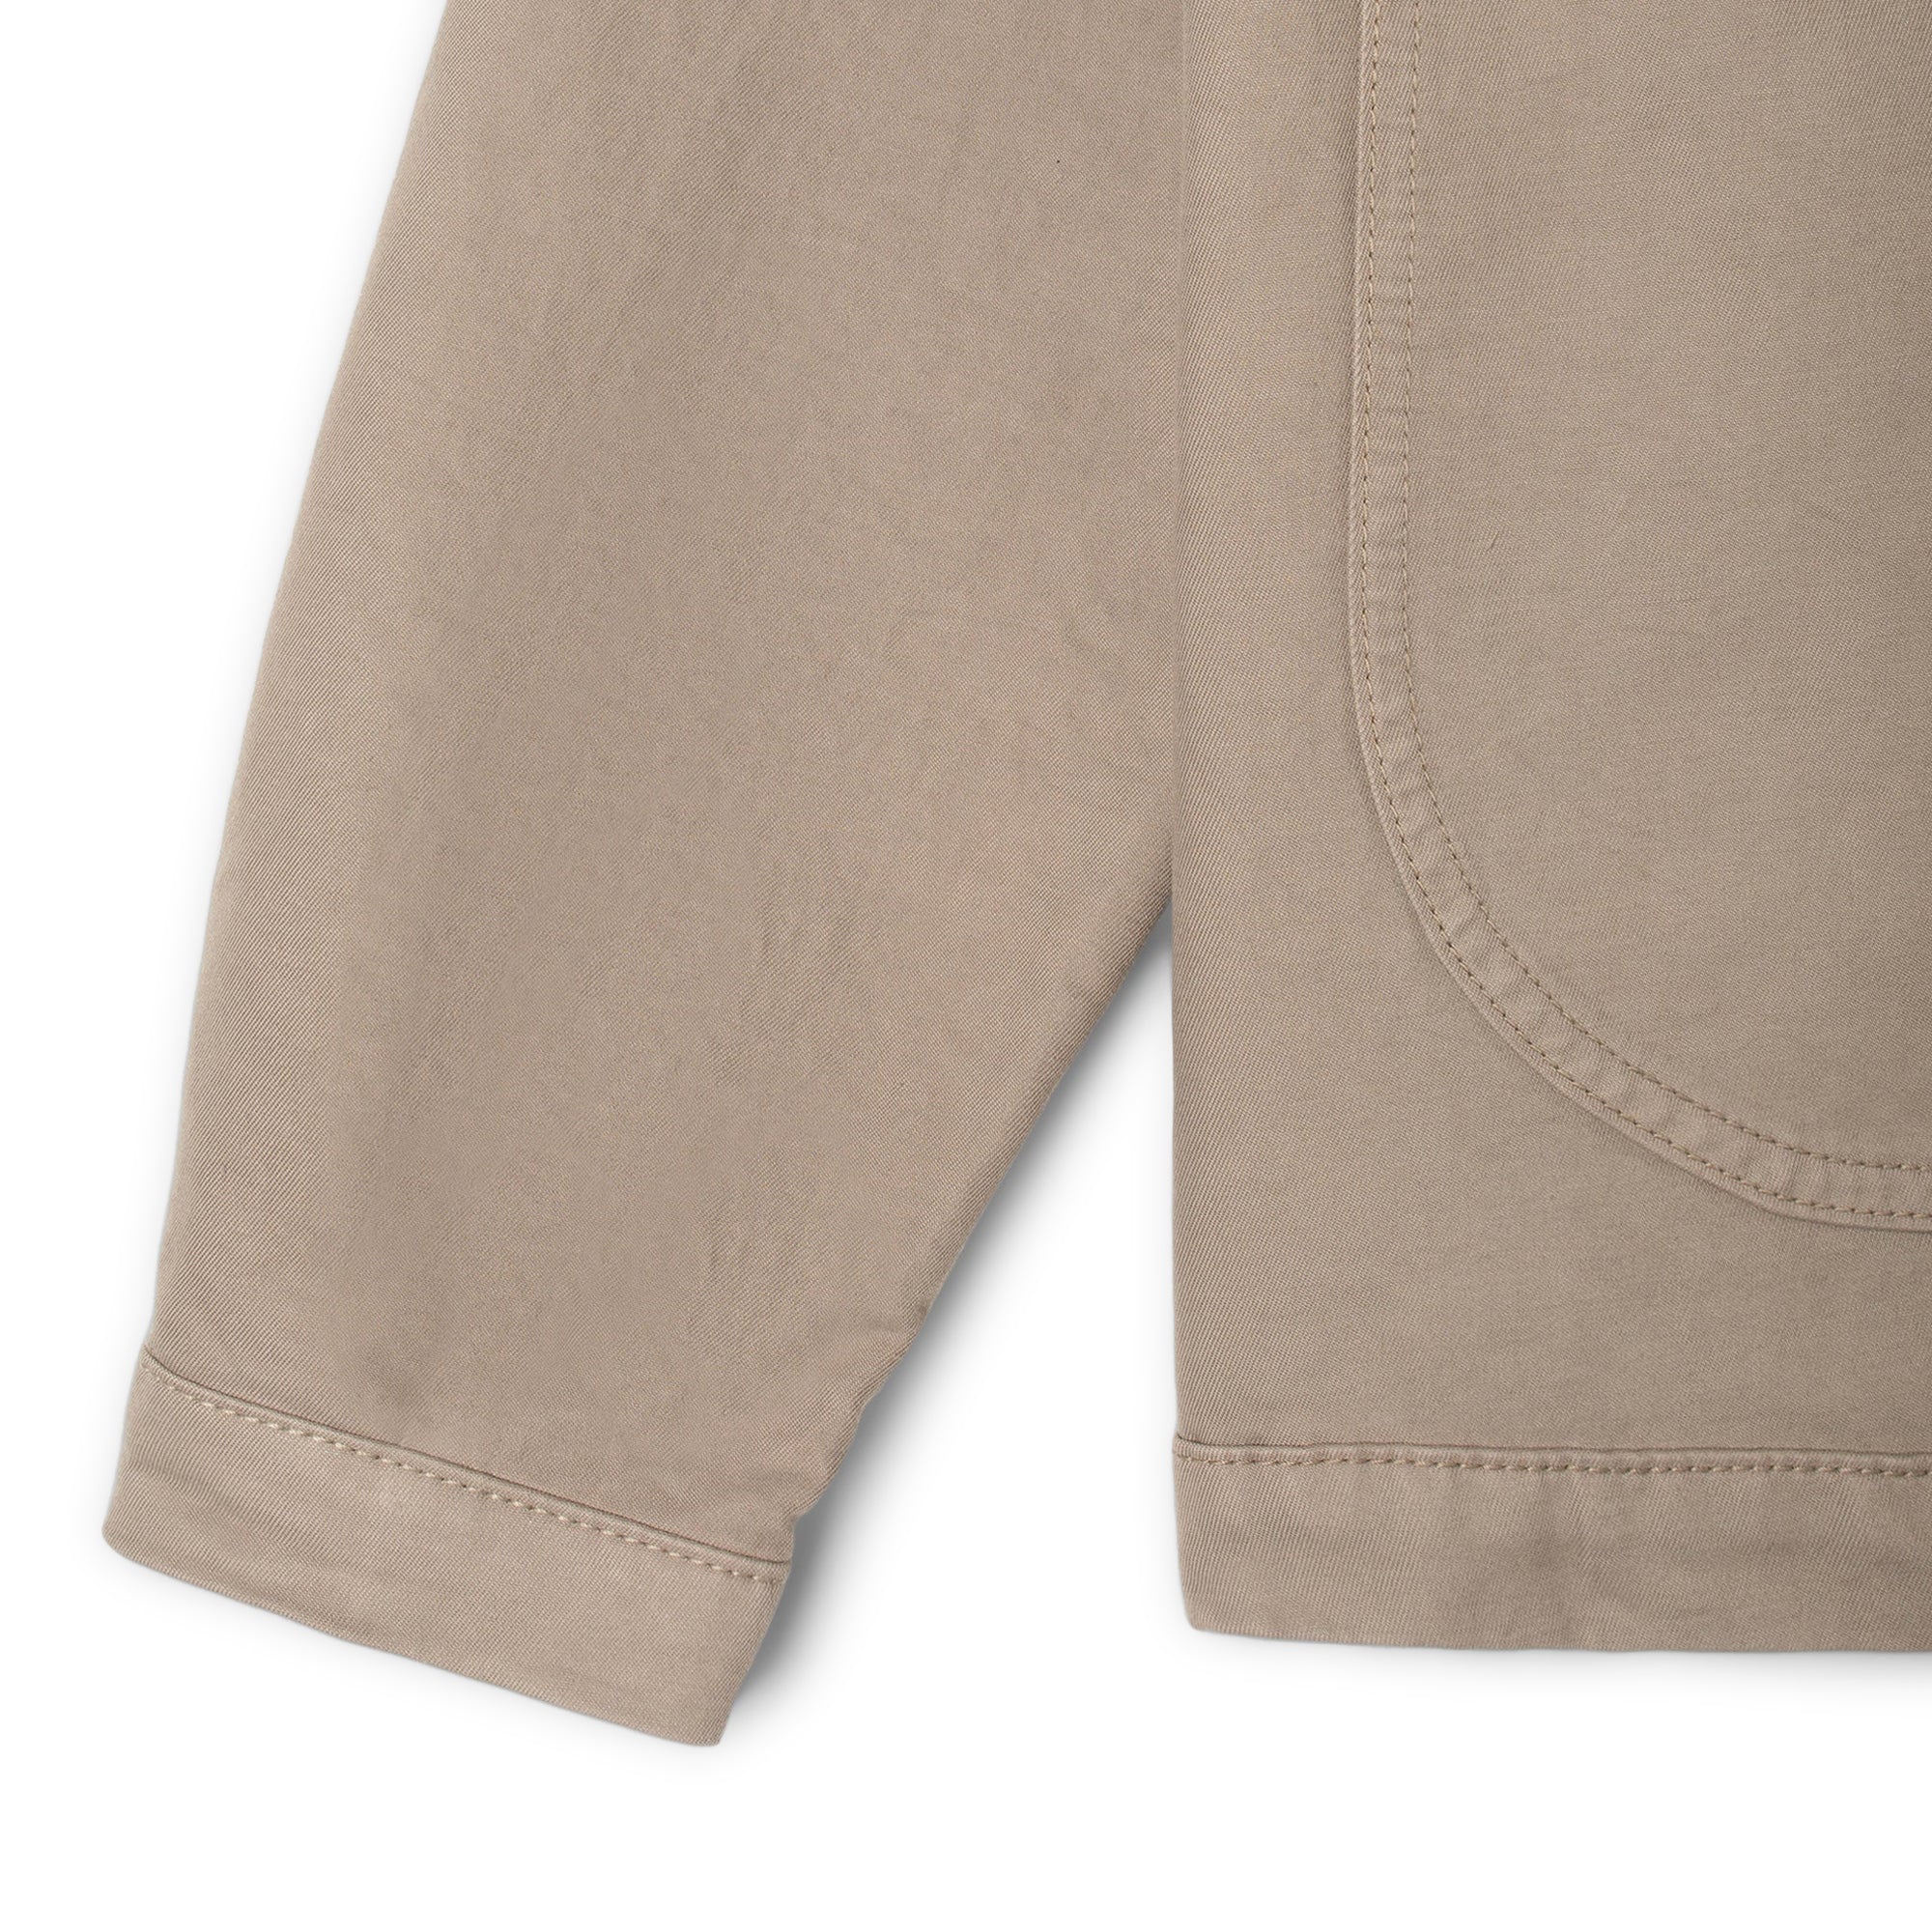 Stan Ray Coverall Jacket - Dusk Twill